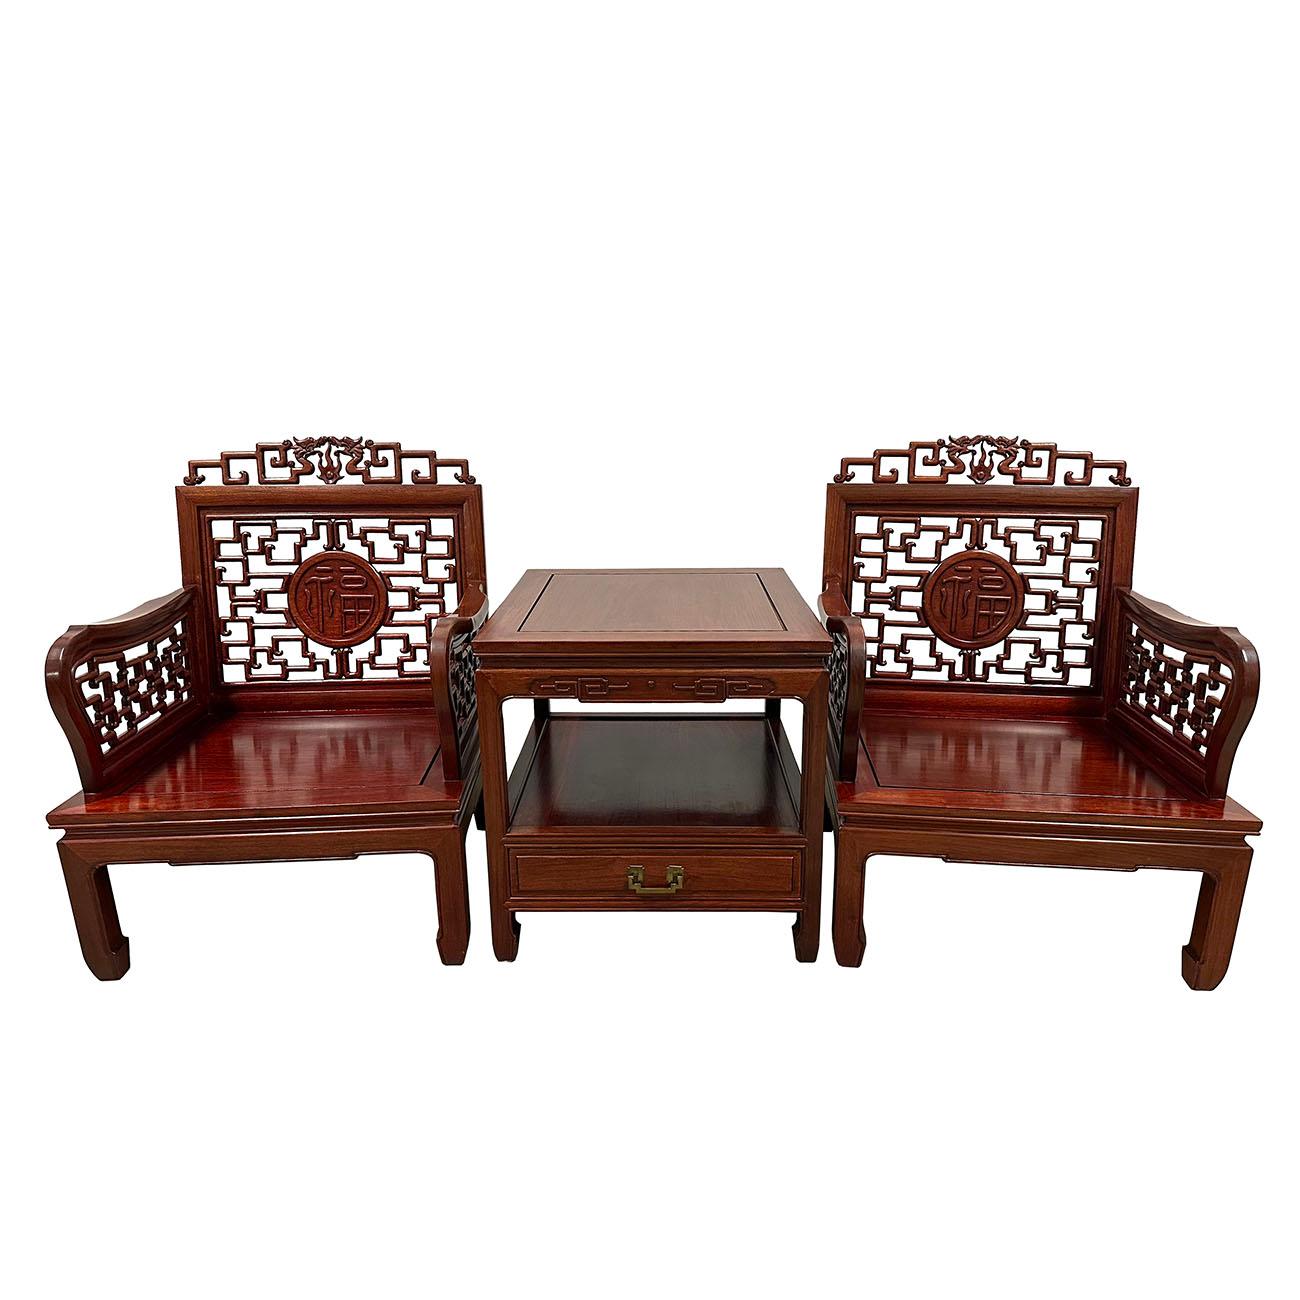 This set of gorgeous Chinese Rosewood Carved Living room Chairs and table have about 70 years history and still has its original condition, very smooth to touch, full of patina. They were hand made and hand carved with solid rosewood. Very heavy and